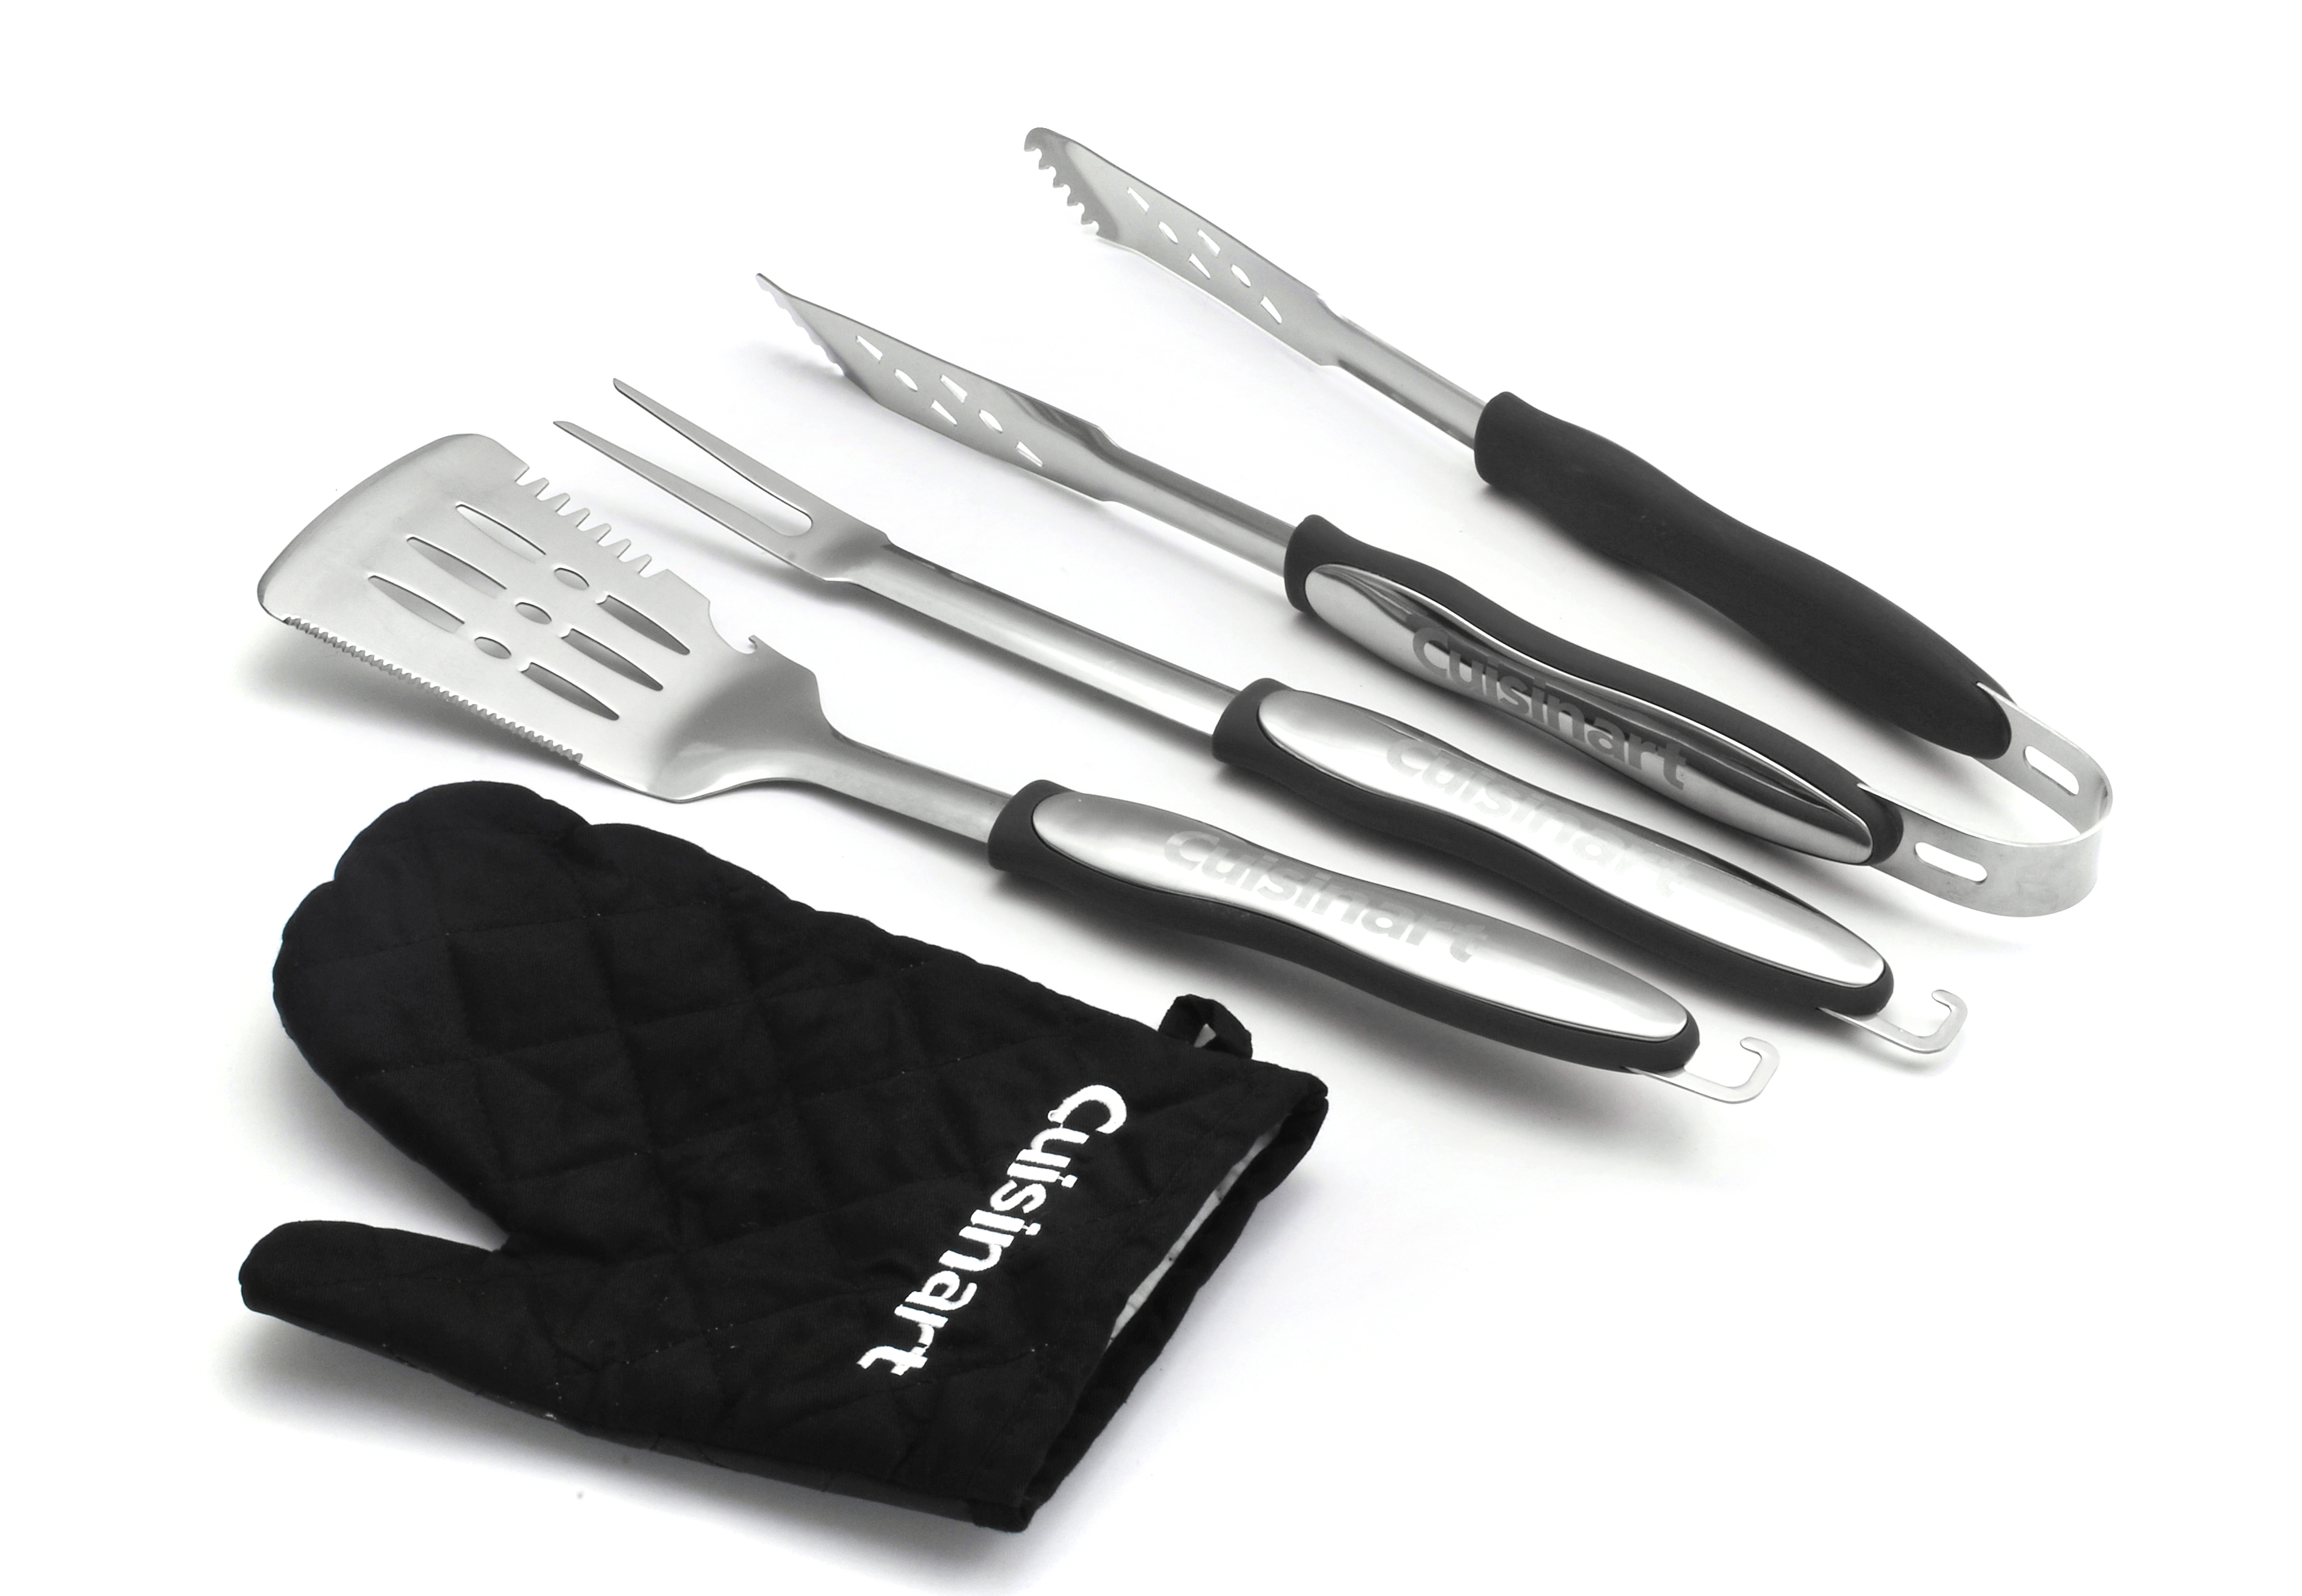 Cuisinart® 3 Piece Grilling Tool Set with Grill Glove - Includes Tongs, Spatula, Grill Fork and a BONUS Grill Glove - image 1 of 2